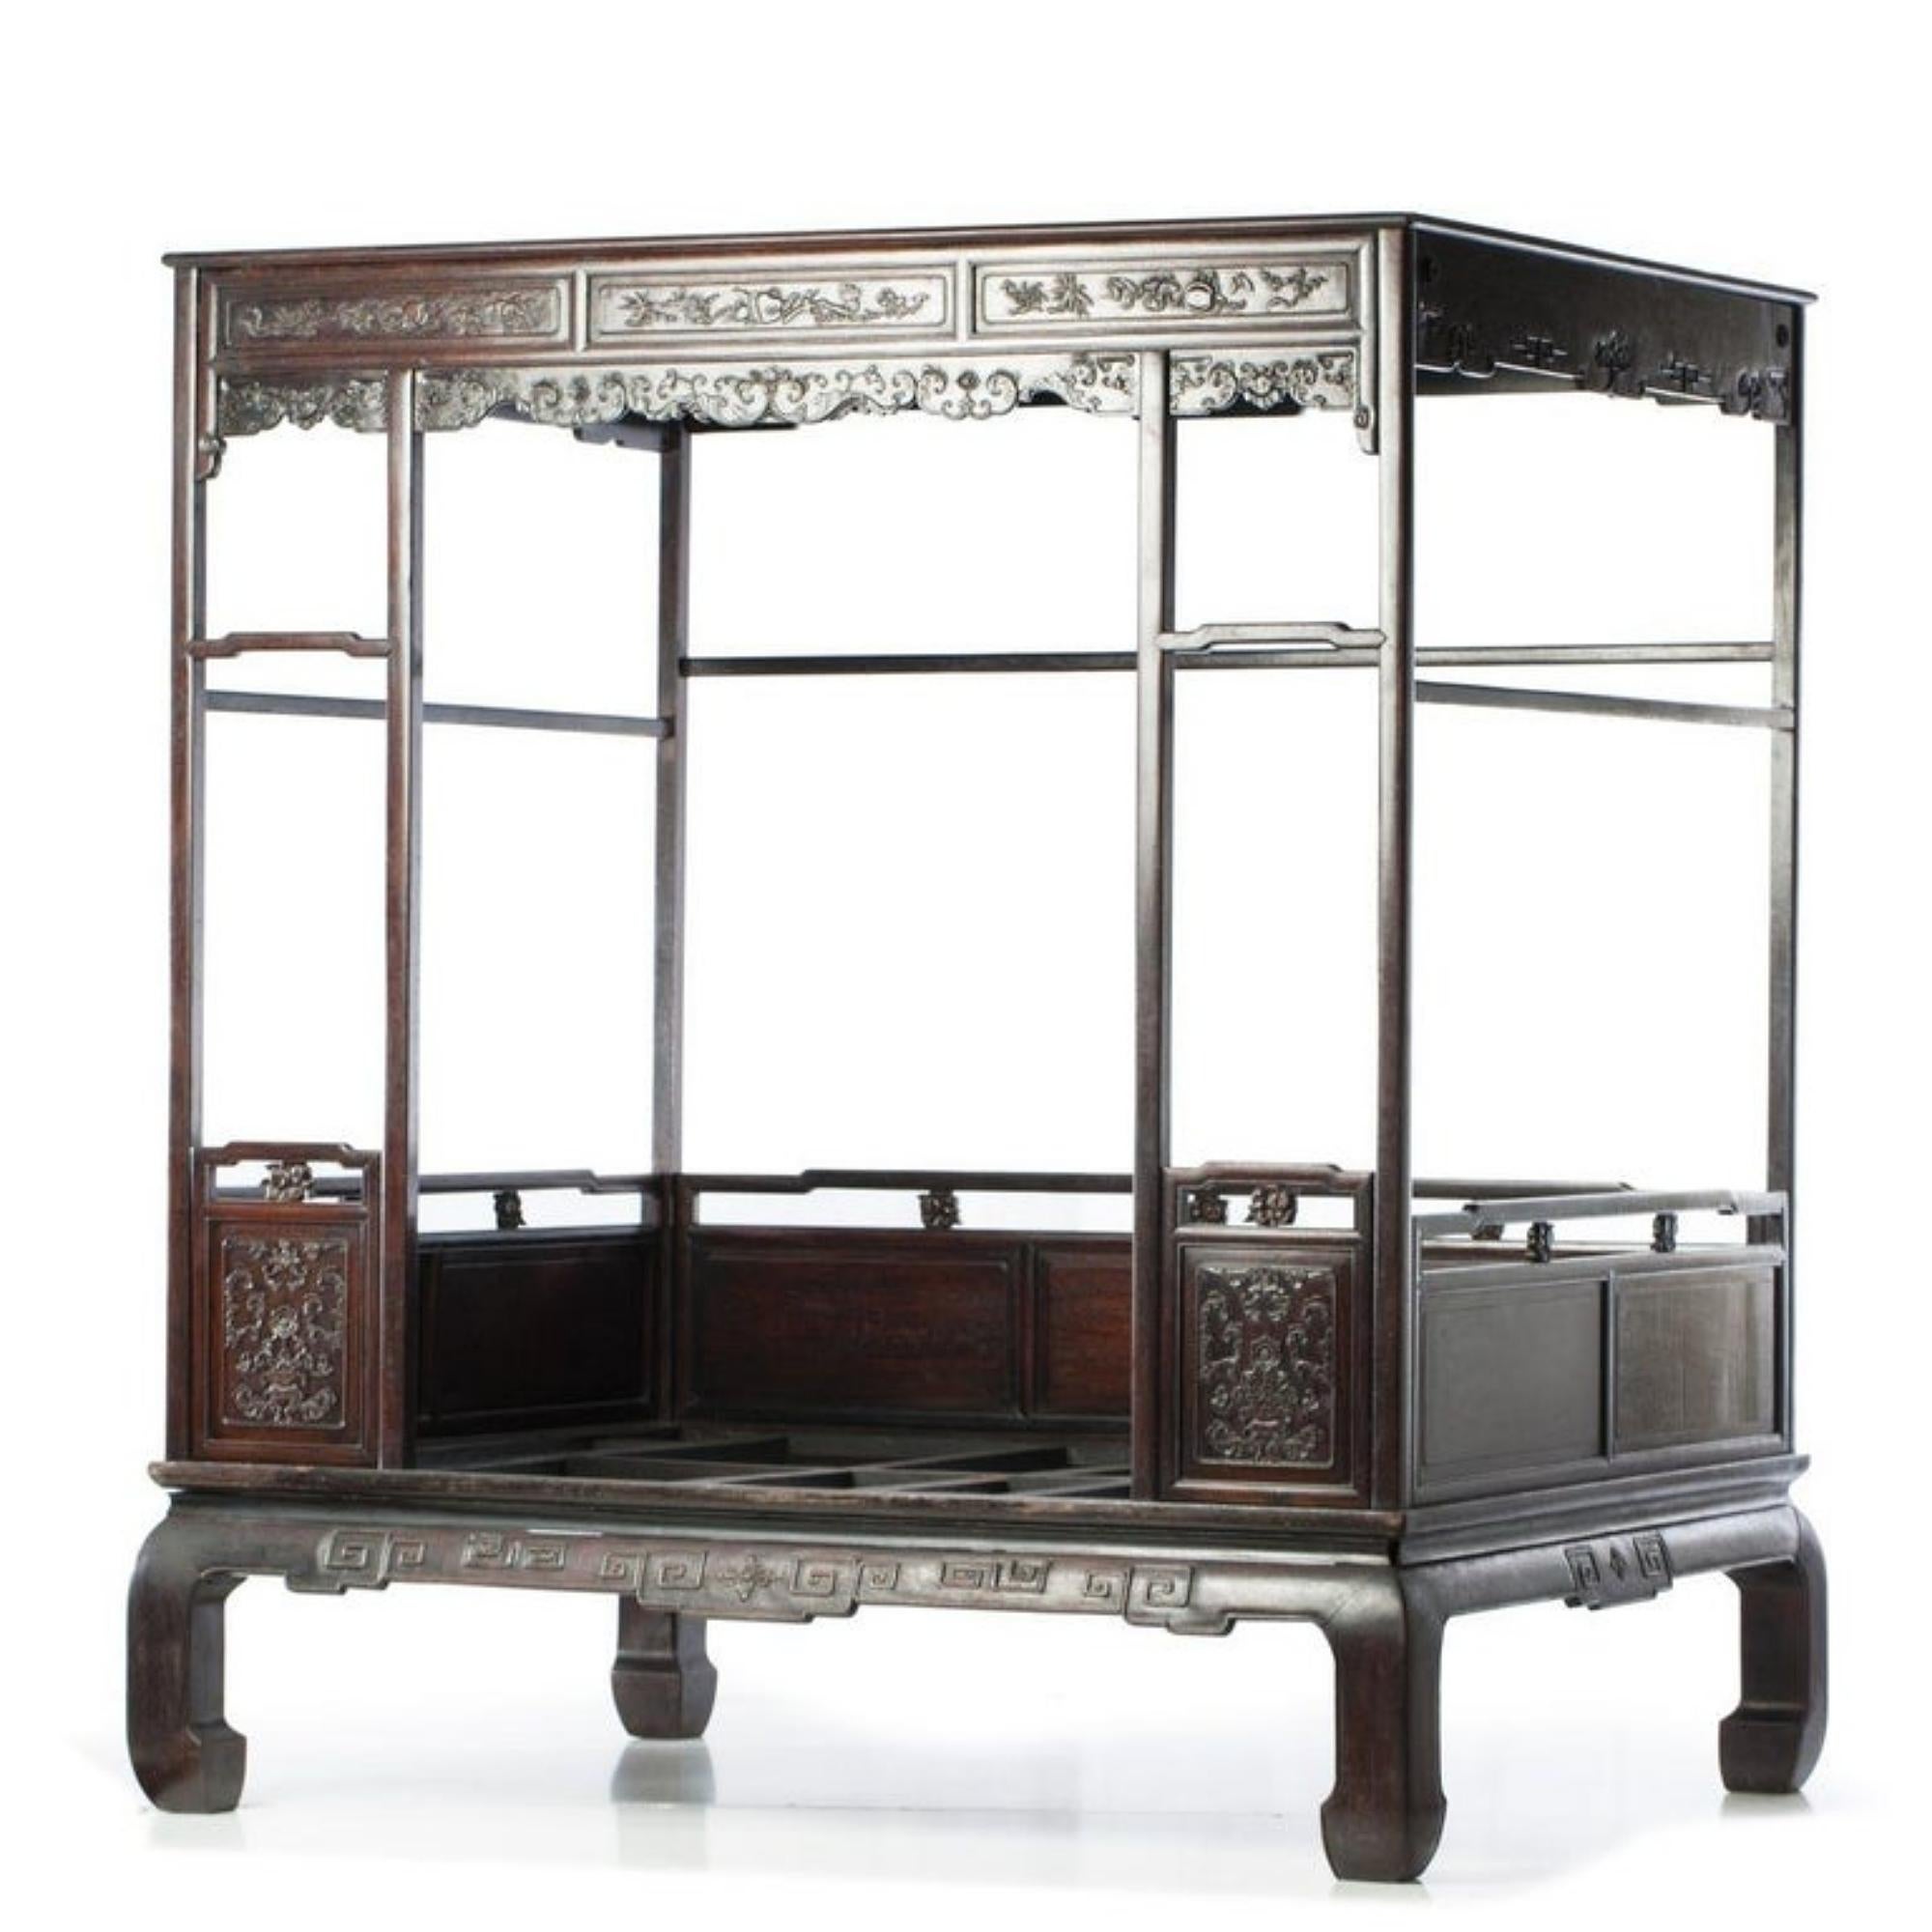 Hand-Crafted Important and Rare Canopy Bed of the Guangxu Reign For Sale